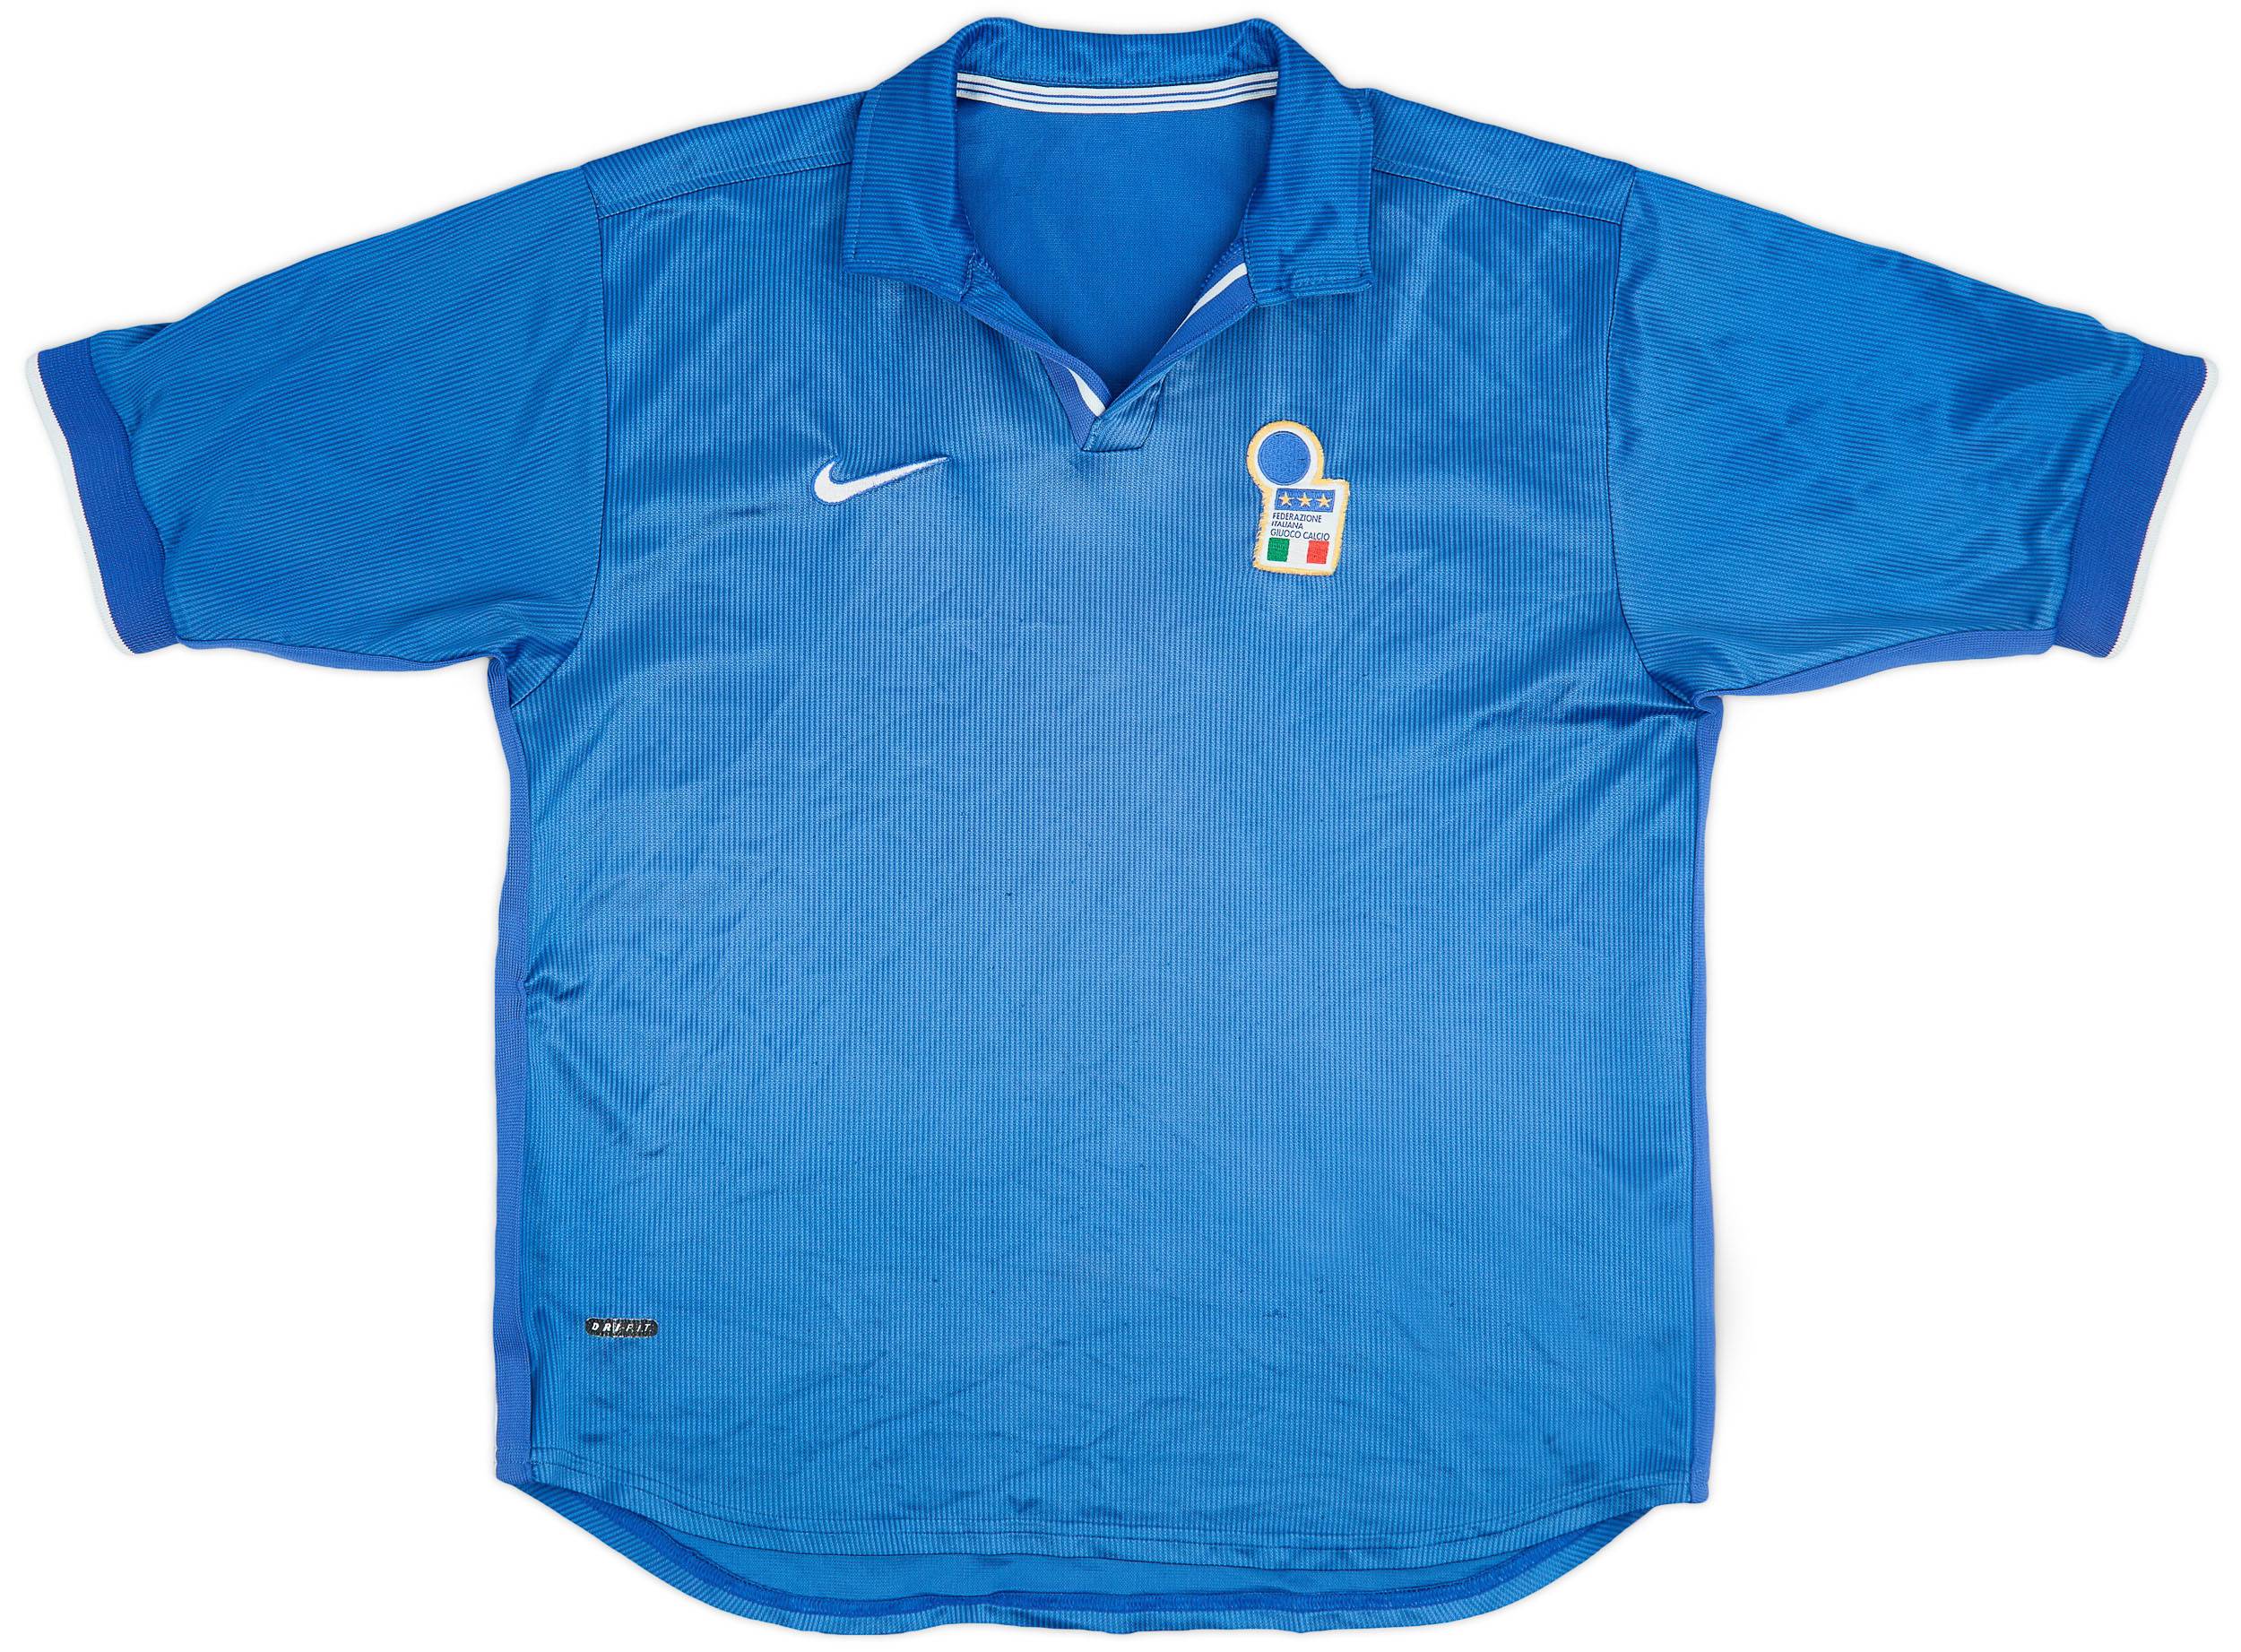 1997-98 Italy Home Shirt - 6/10 - (L)